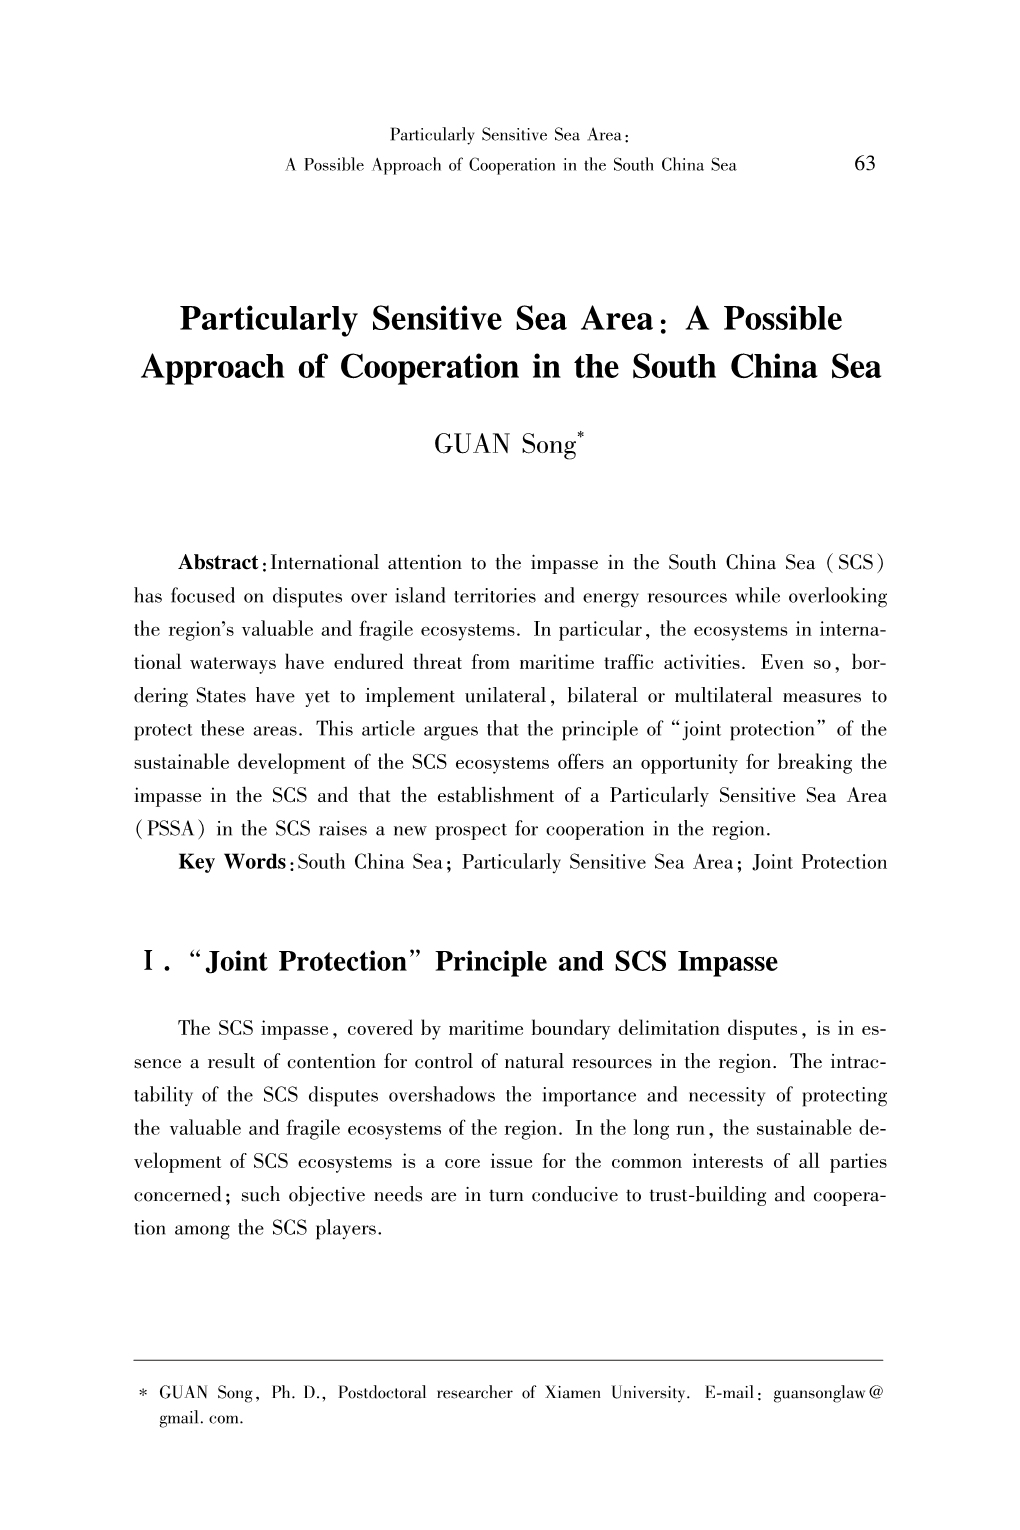 Particularly Sensitive Sea Area: a Possible Approach of Cooperation in the South China Sea 63